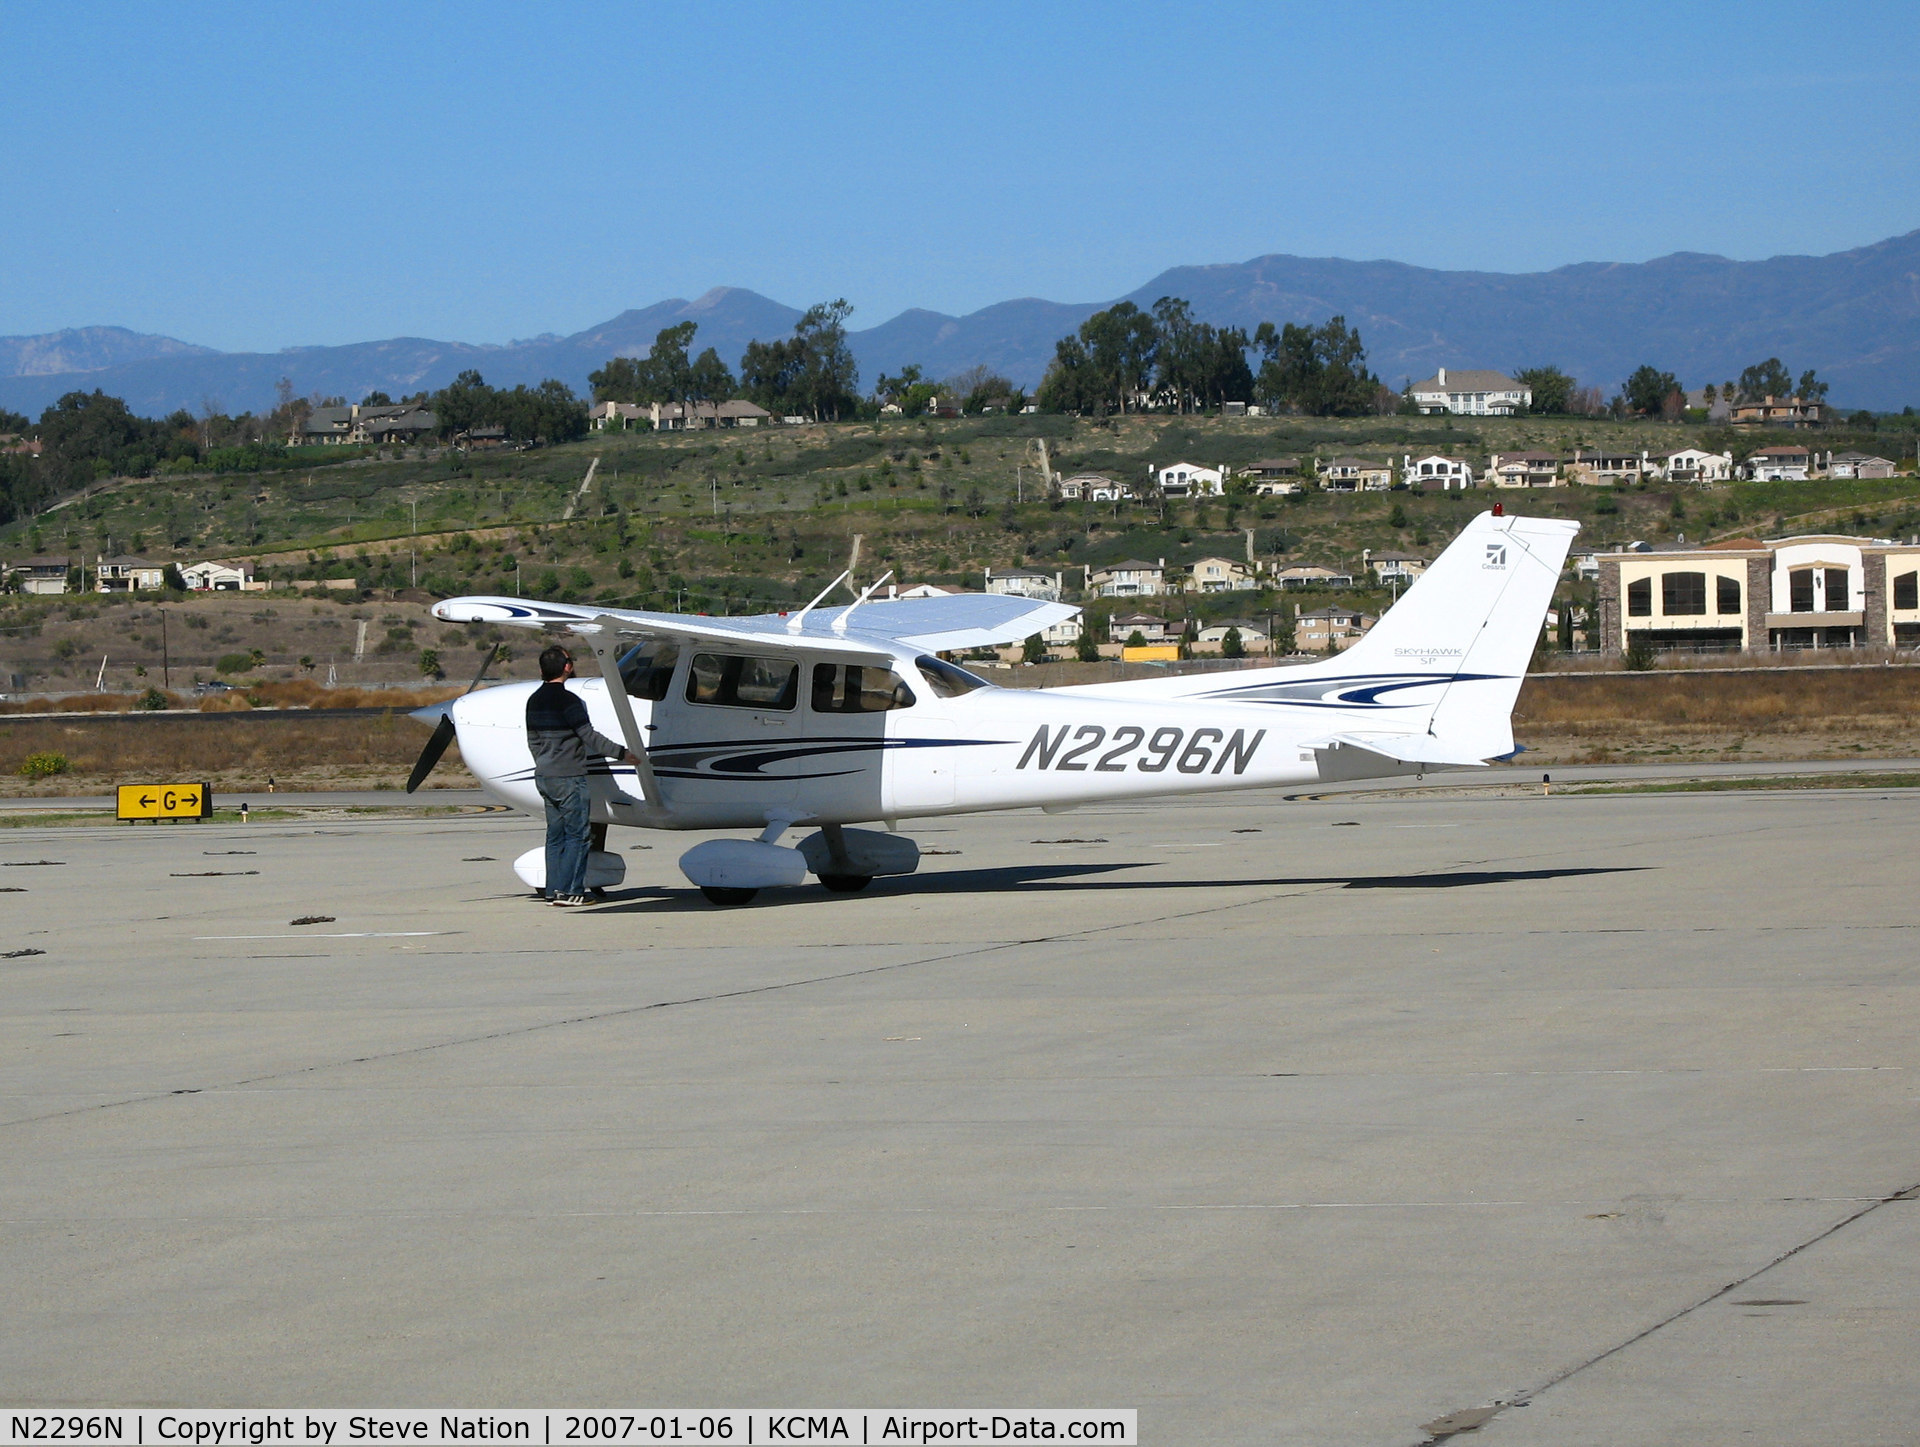 N2296N, 2005 Cessna 172S C/N 172S9967, 2005 Cessna 172S taxis out for training flight at Camarillo Airport, CA home base on balmy, sunny January 2007 picture postcard day